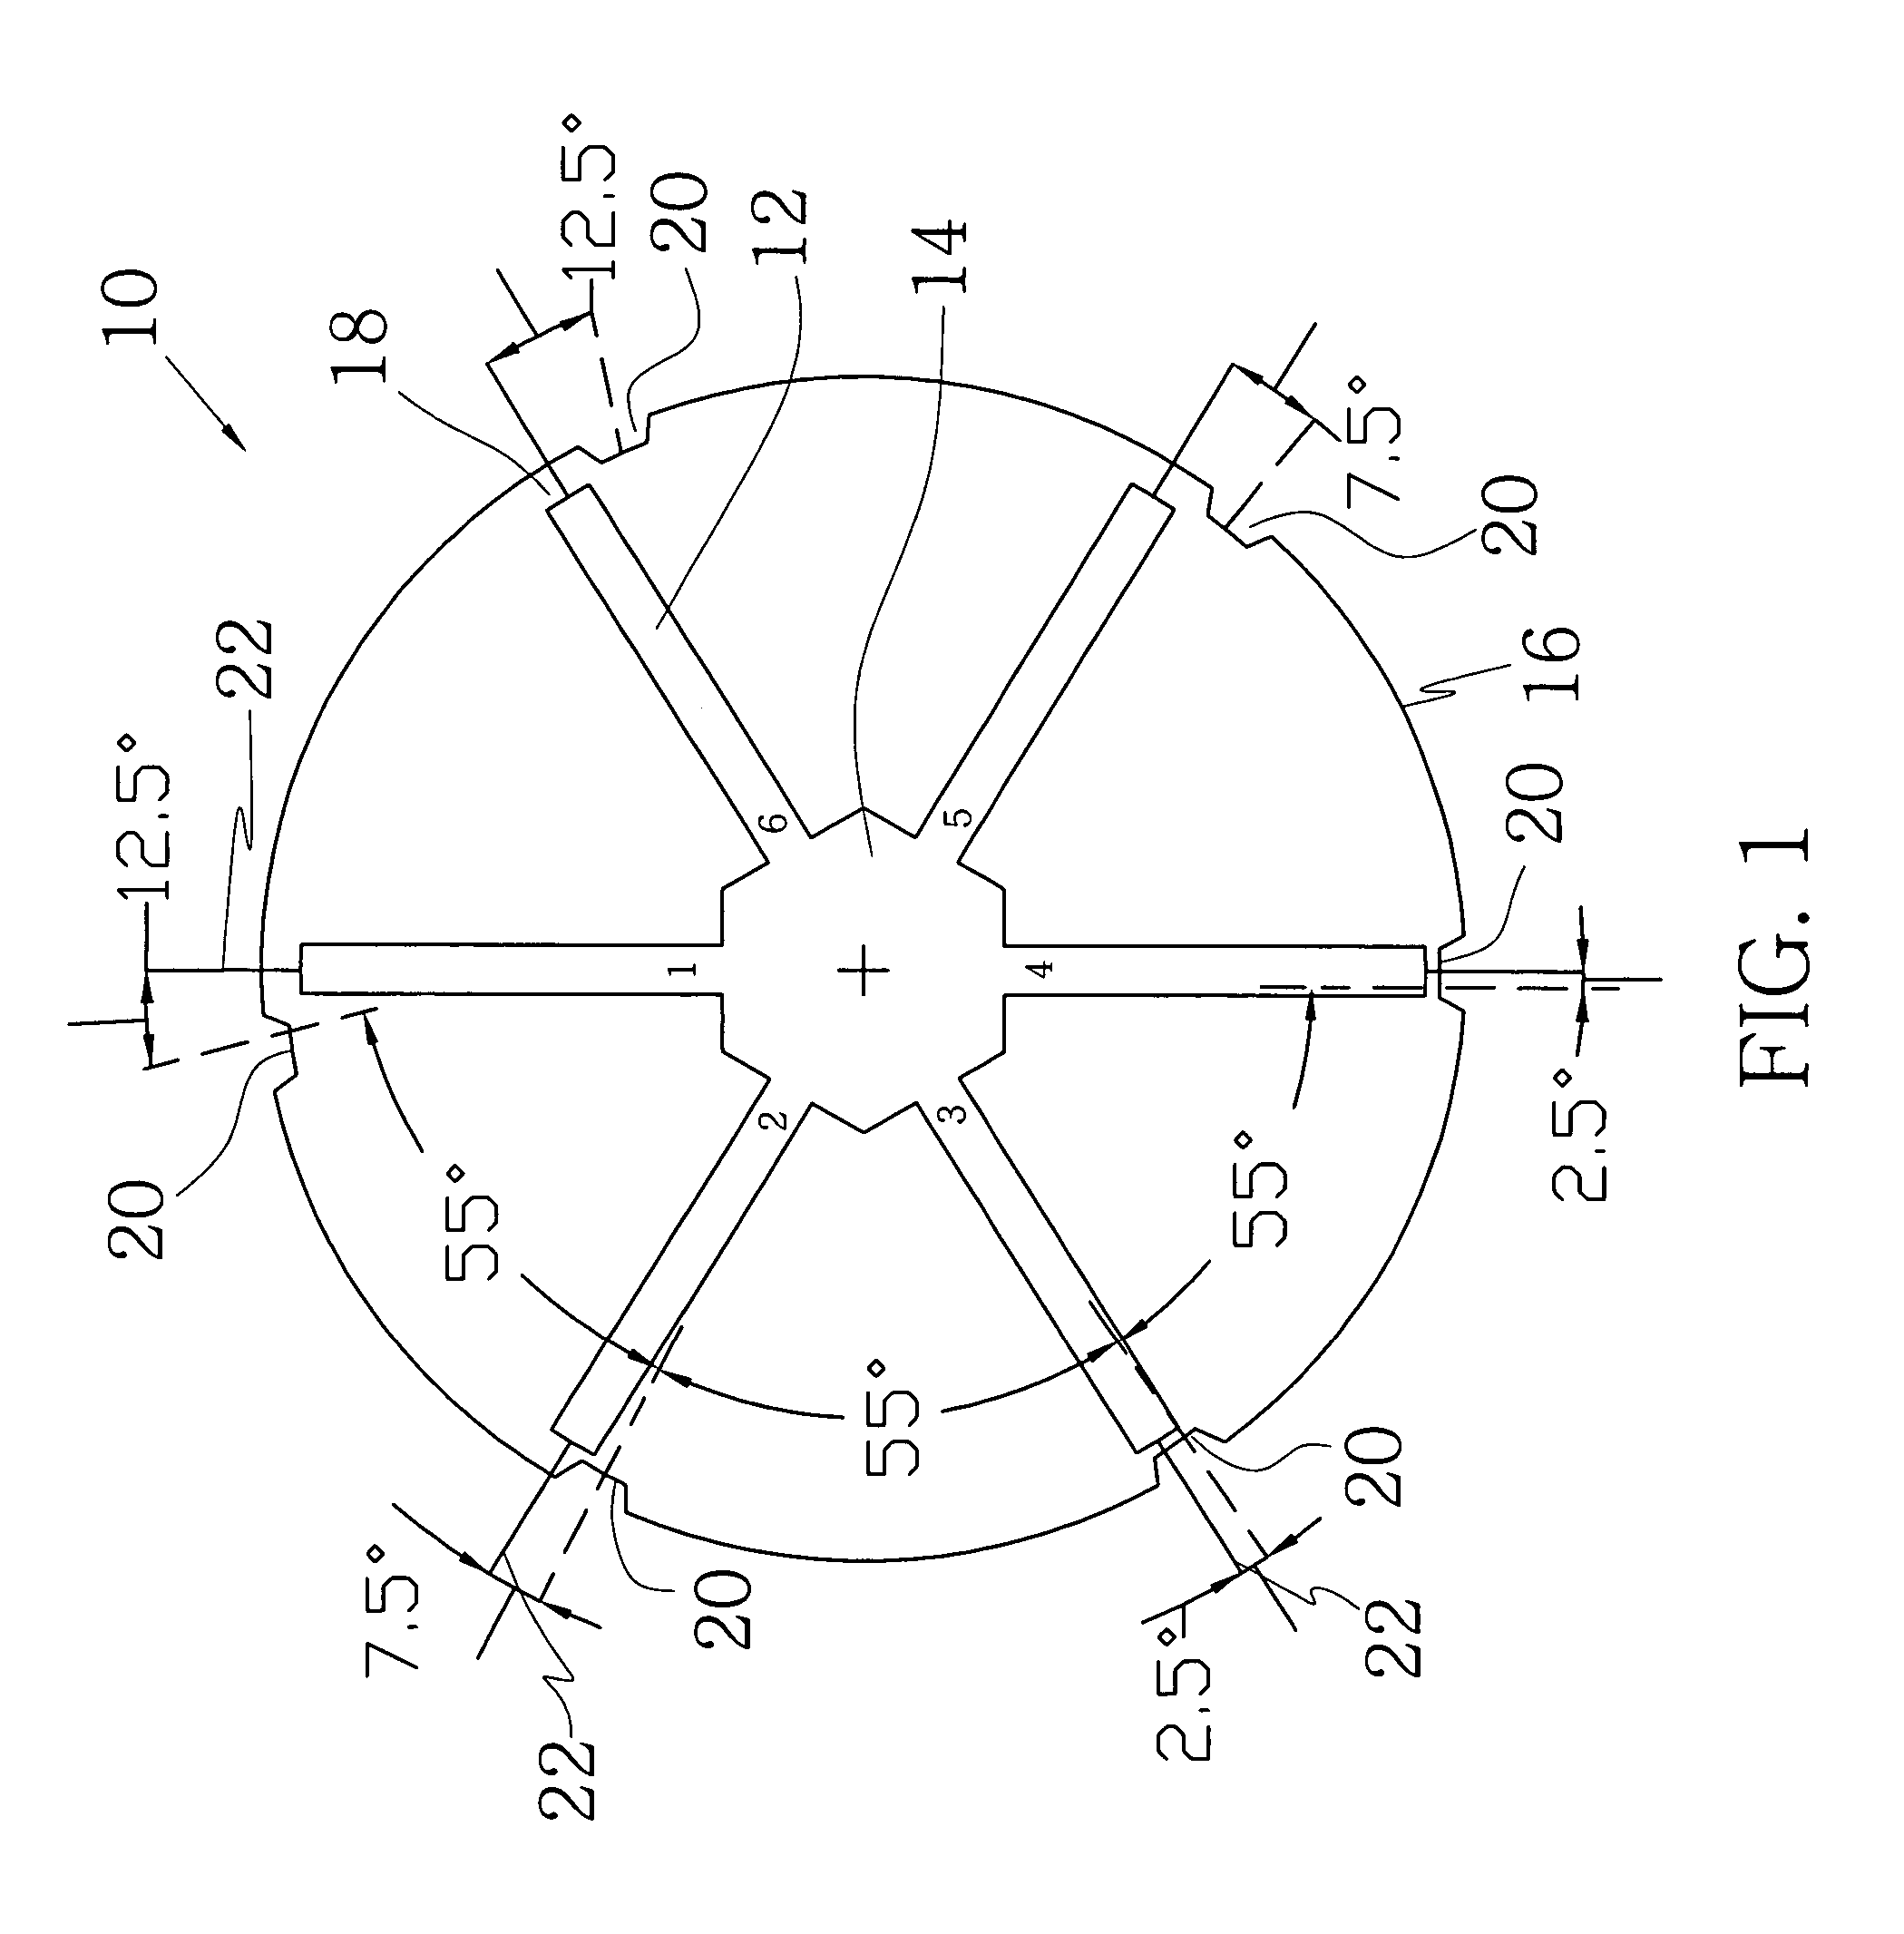 Rotor assembly and stator assembly for an electrical machine